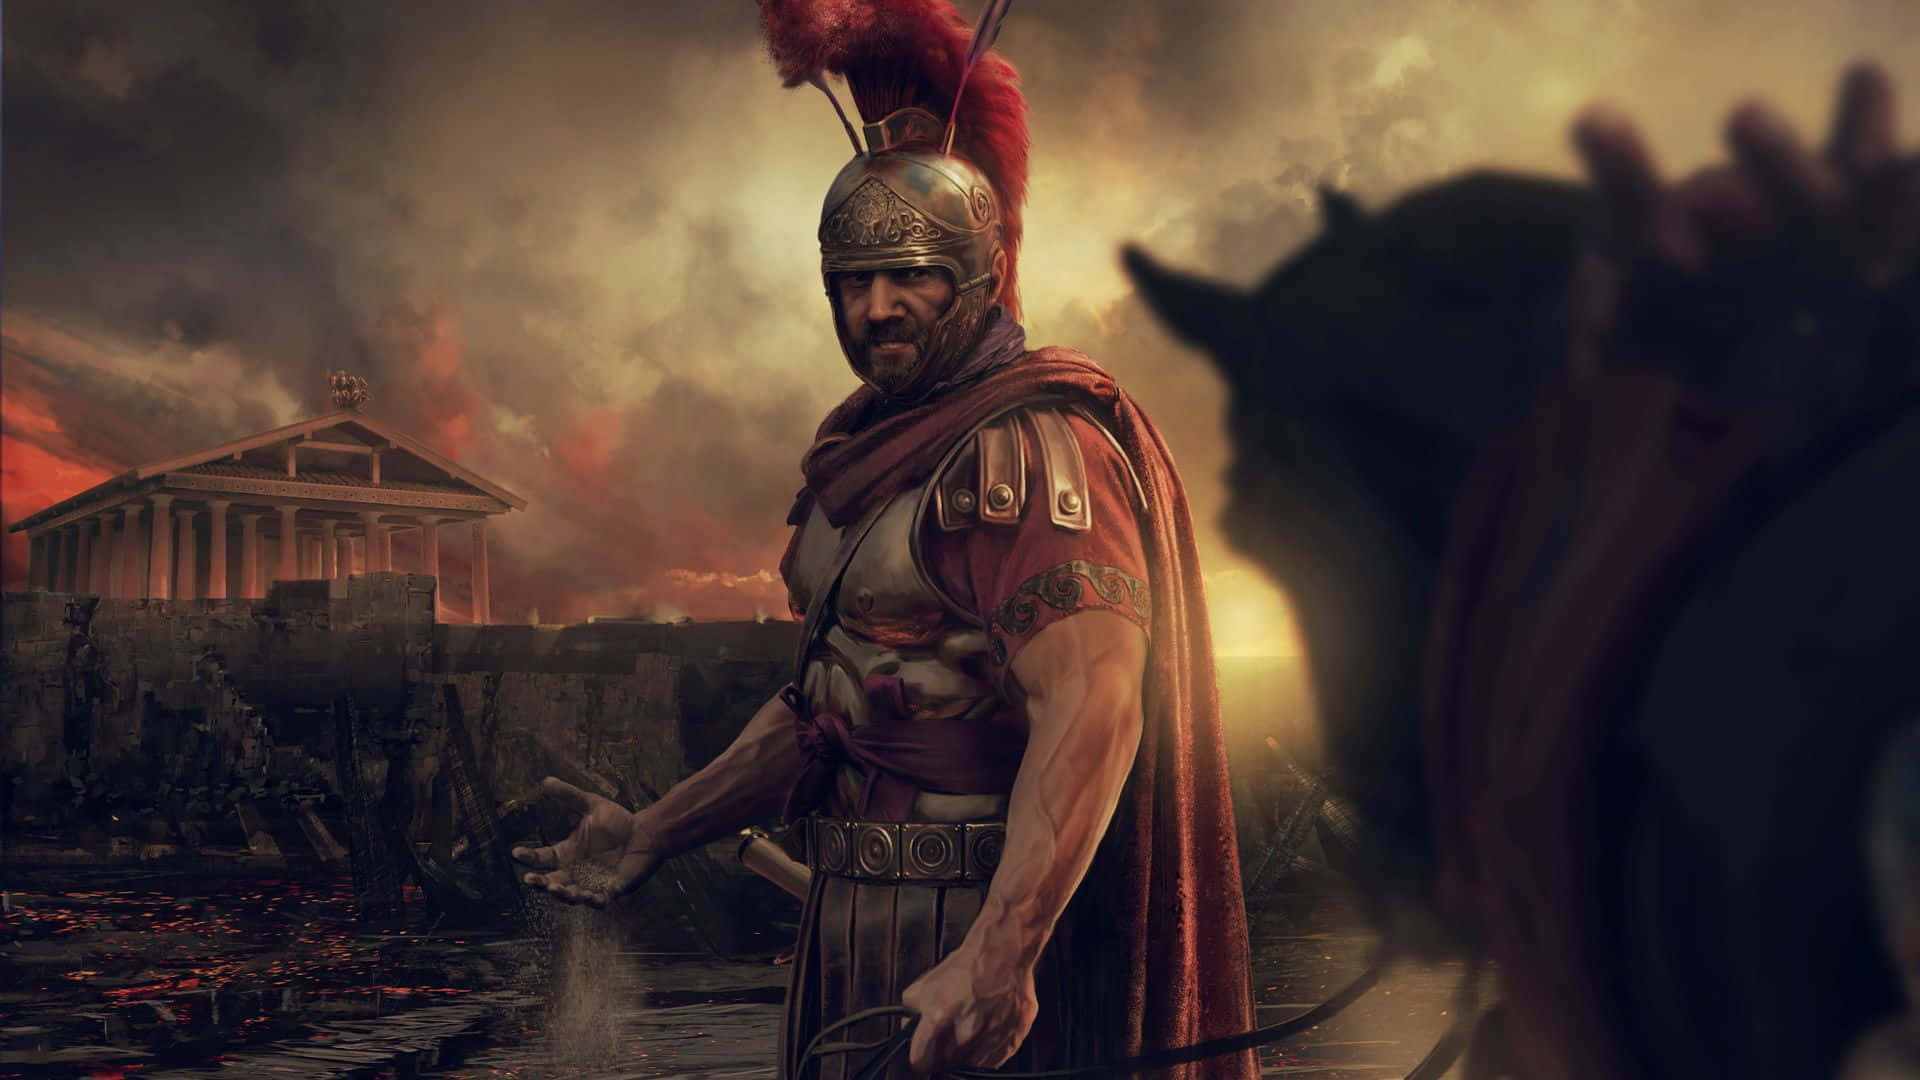 Invade Ancient Italy with Total War Rome 2